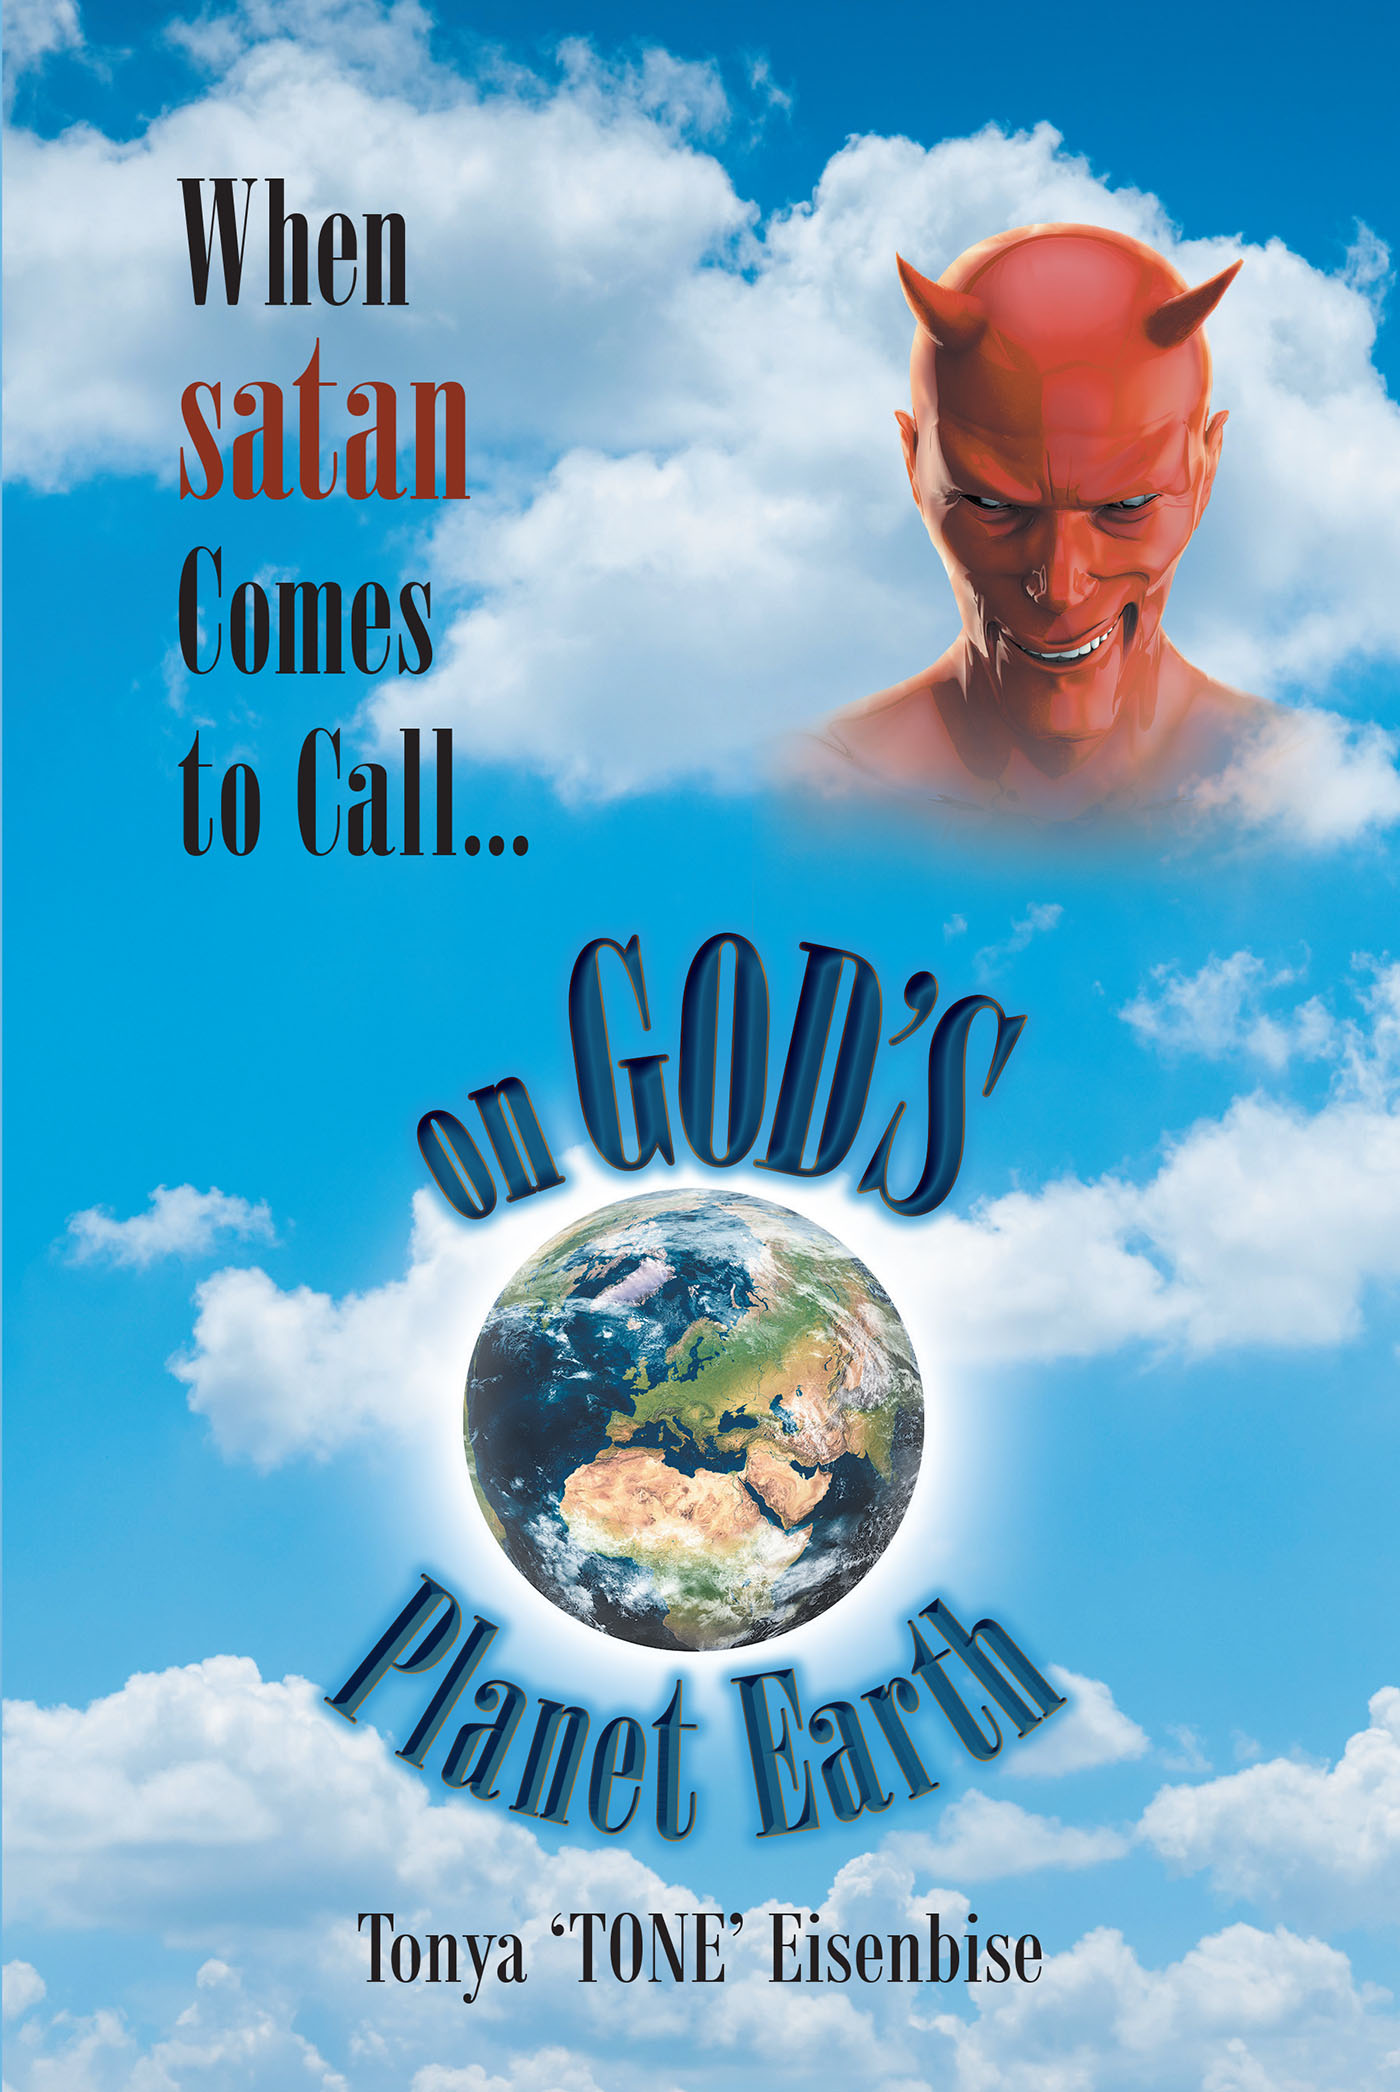 Tonya 'TONE' Eisenbise’s Newly Released “When satan Comes to Call... on God’s Planet Earth” is a Compelling Discussion of Spiritual Warfare